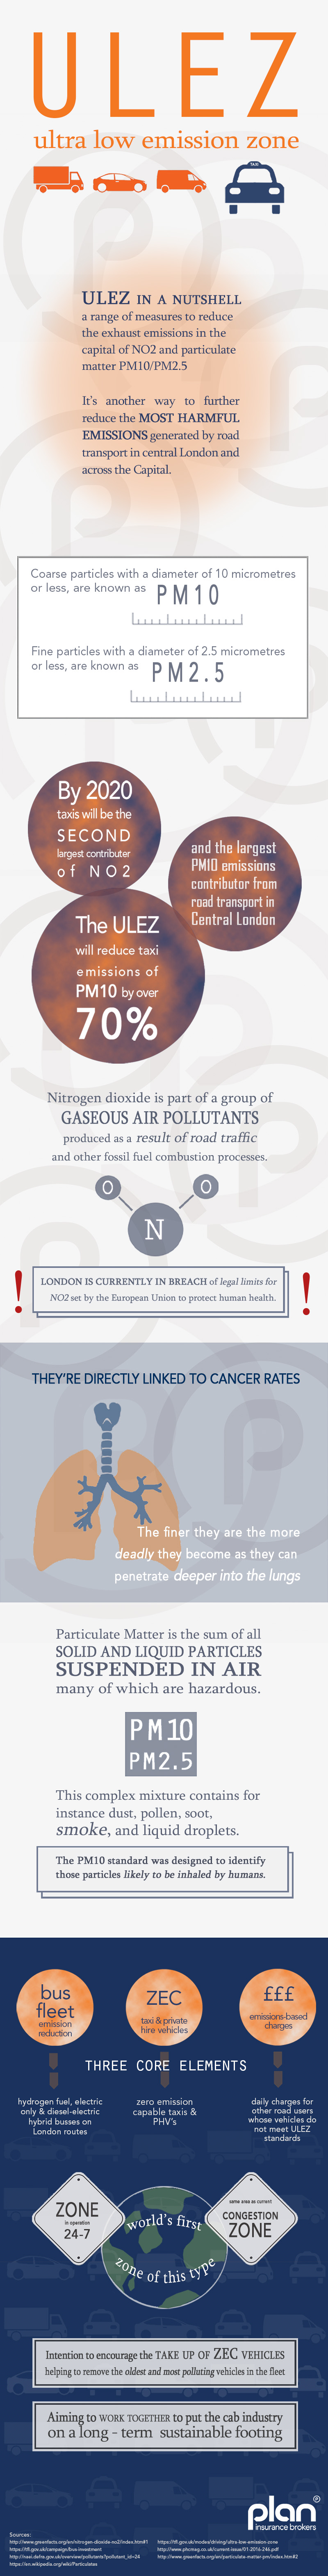 Infographic on London's ULEZ zone - what it is for and why London needs it for Private Hire and Taxi drivers